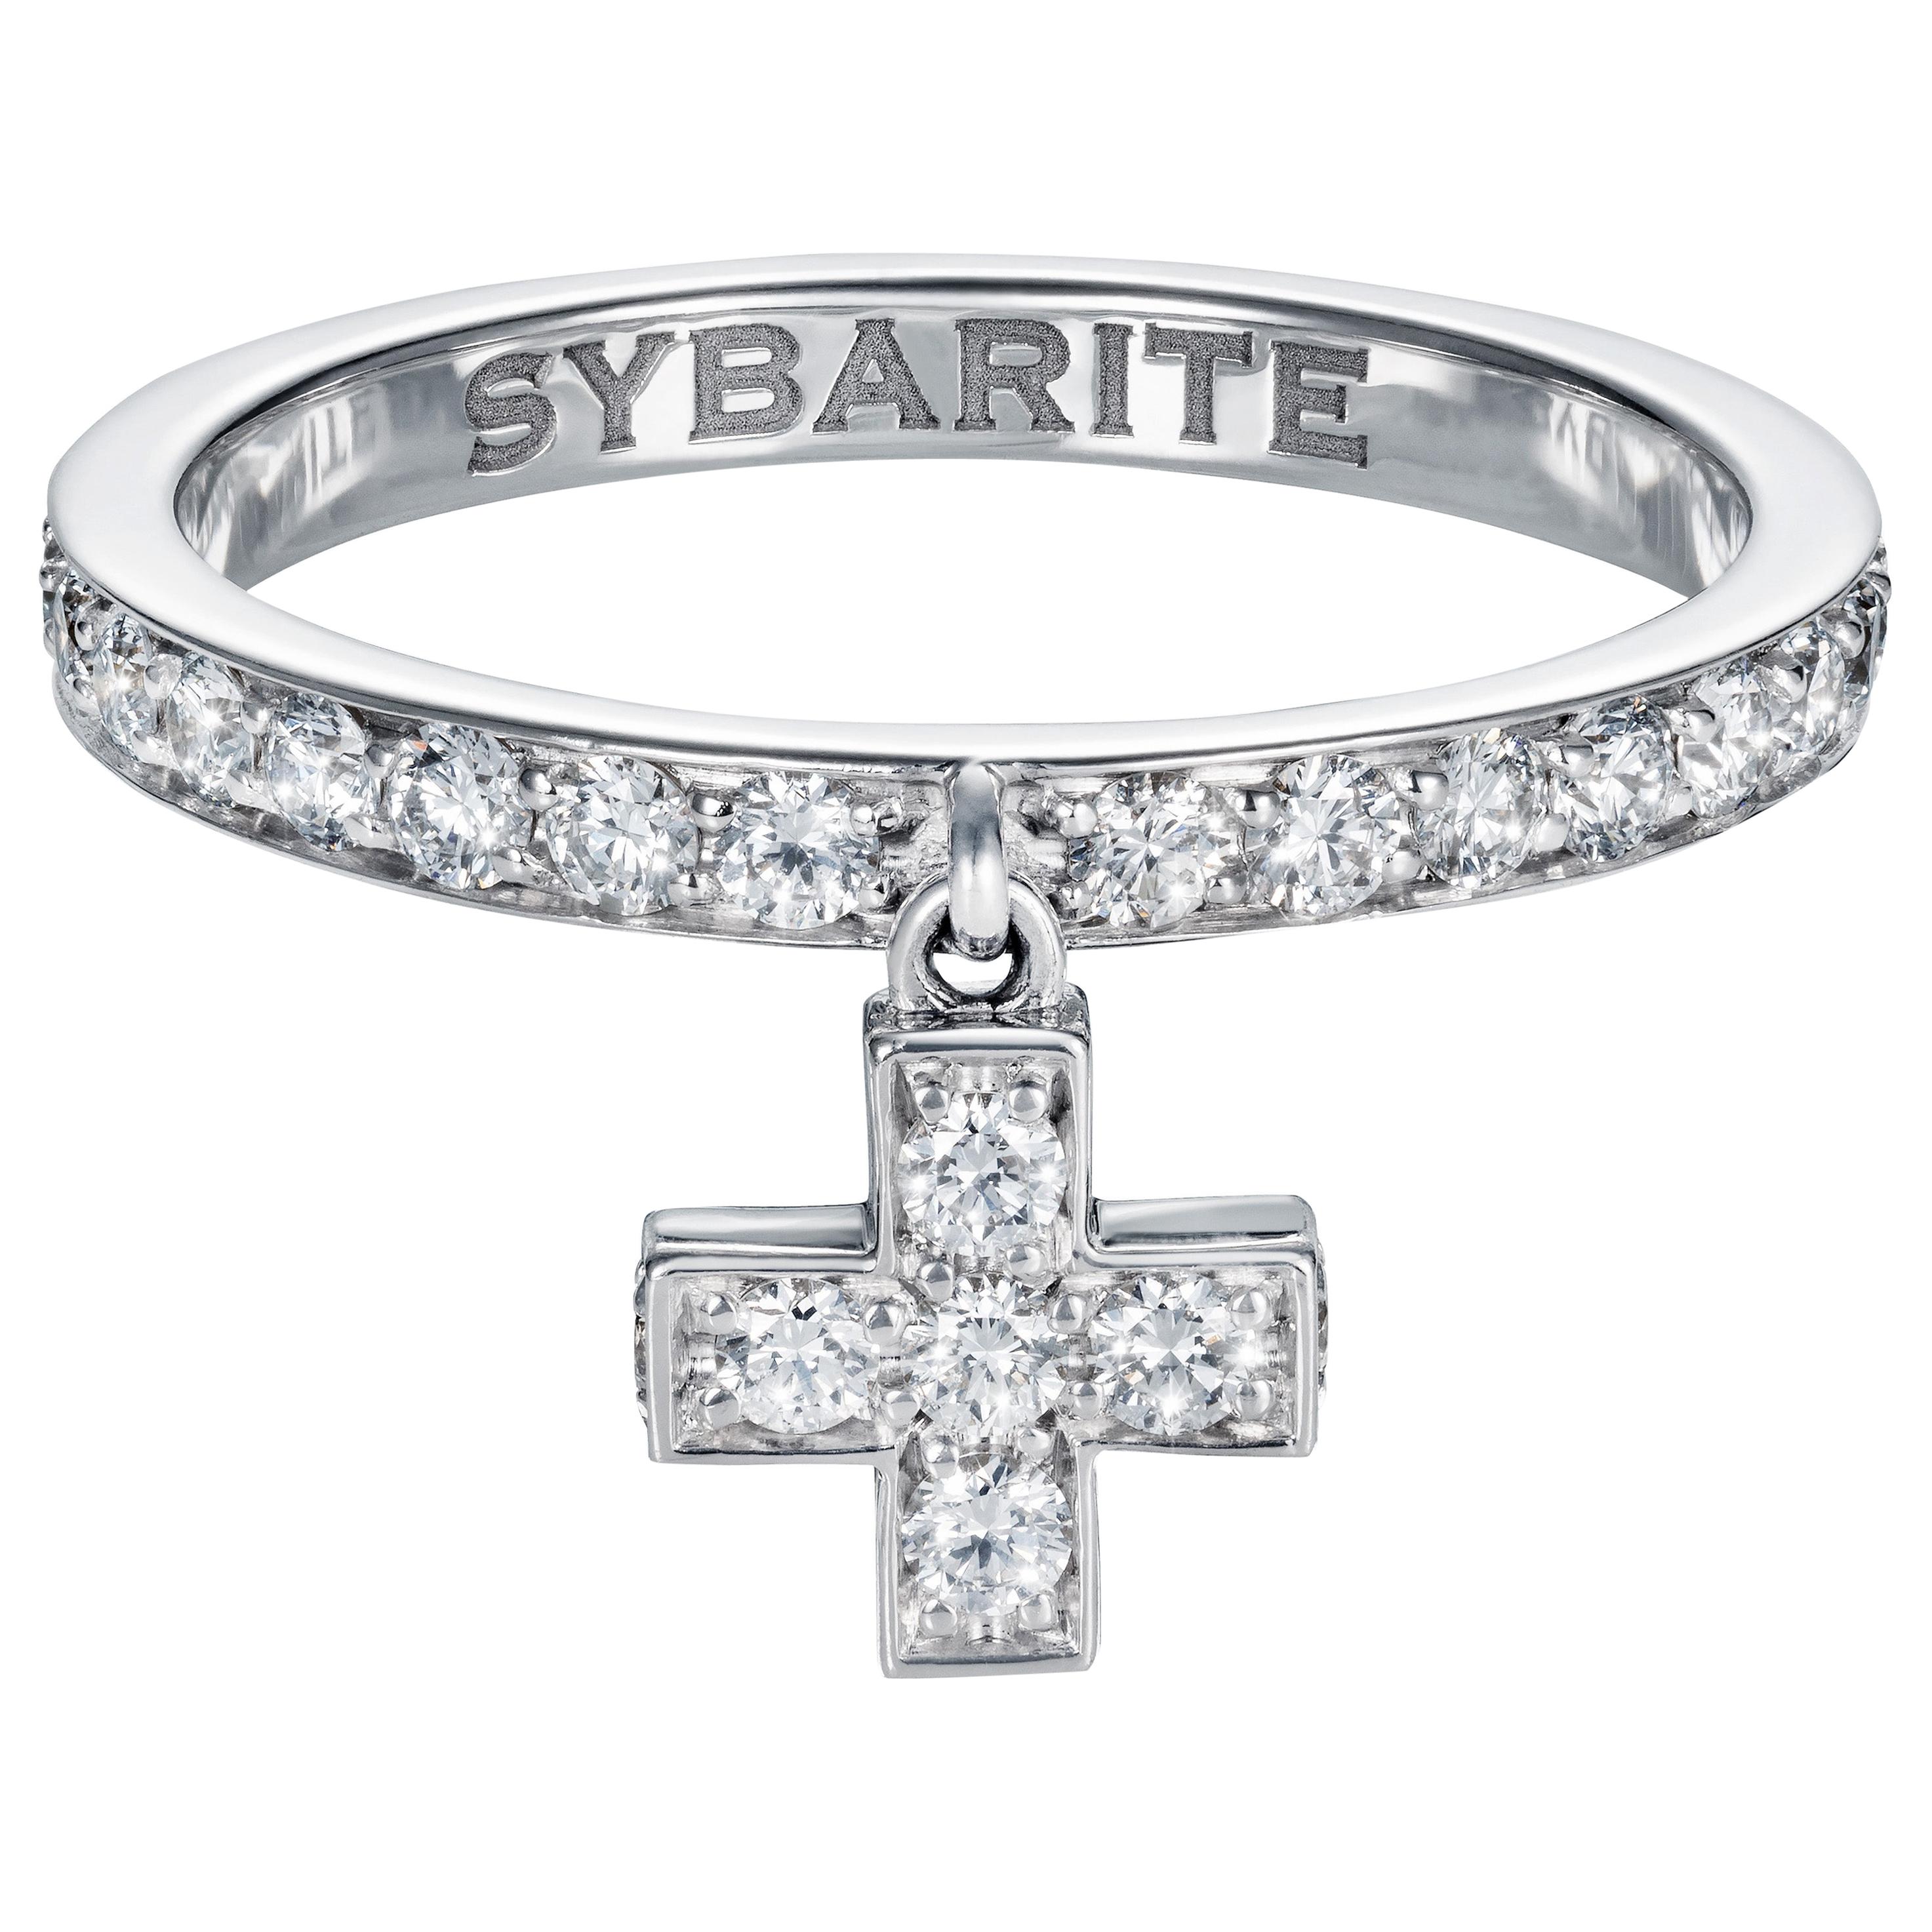 Sybarite Cross Ring in White Gold with White Diamonds